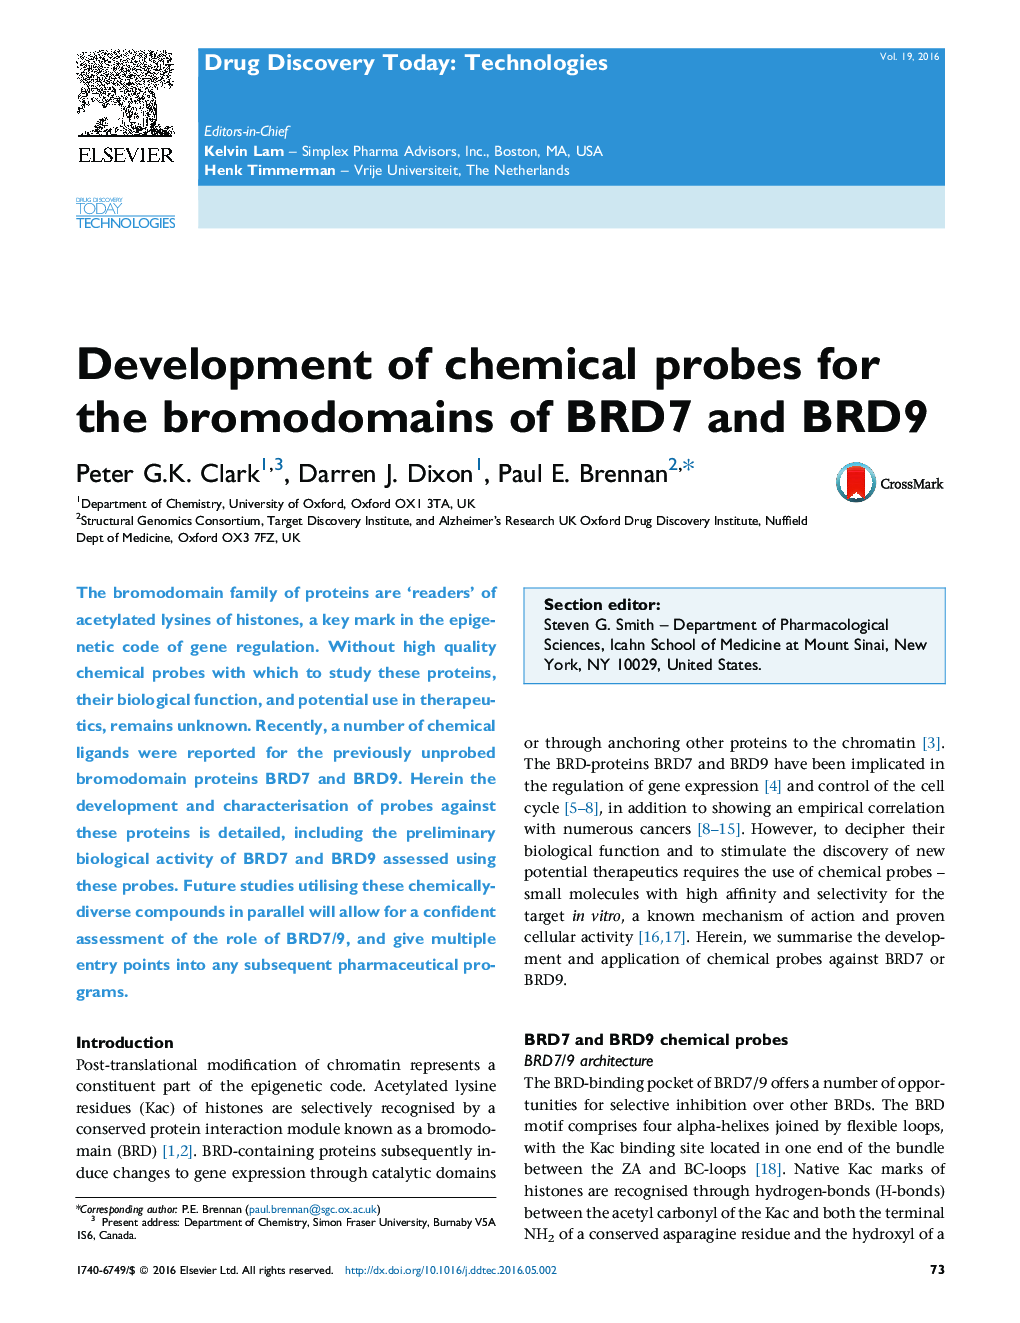 Development of chemical probes for the bromodomains of BRD7 and BRD9